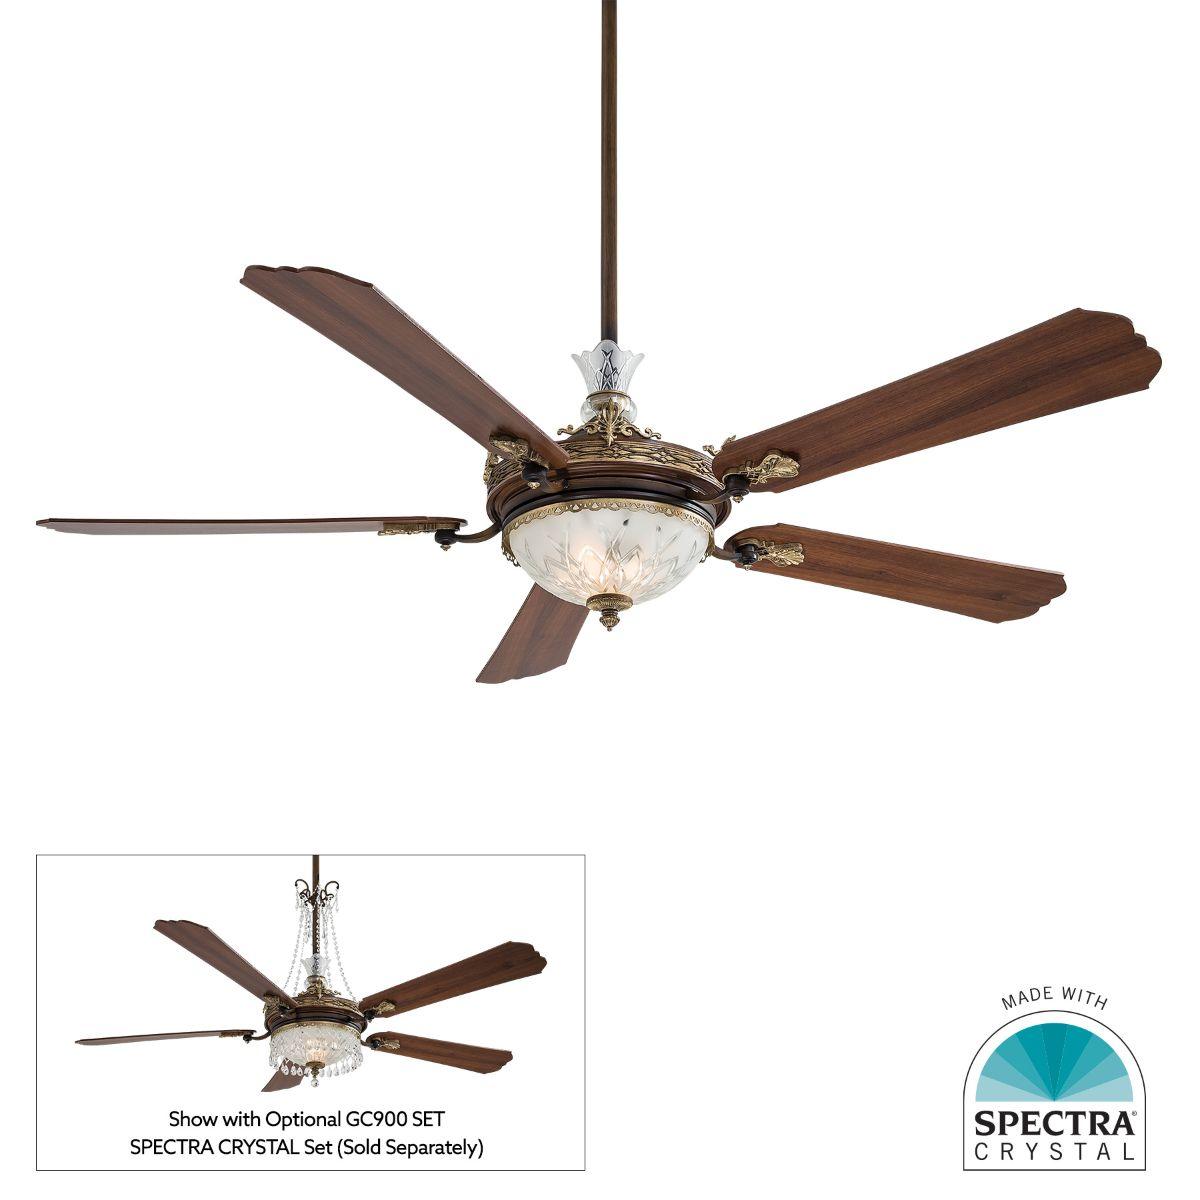 Cristafano 68 Inch Ceiling Fan With Light, Belcaro Walnut Finish, Wall Control Included - Bees Lighting